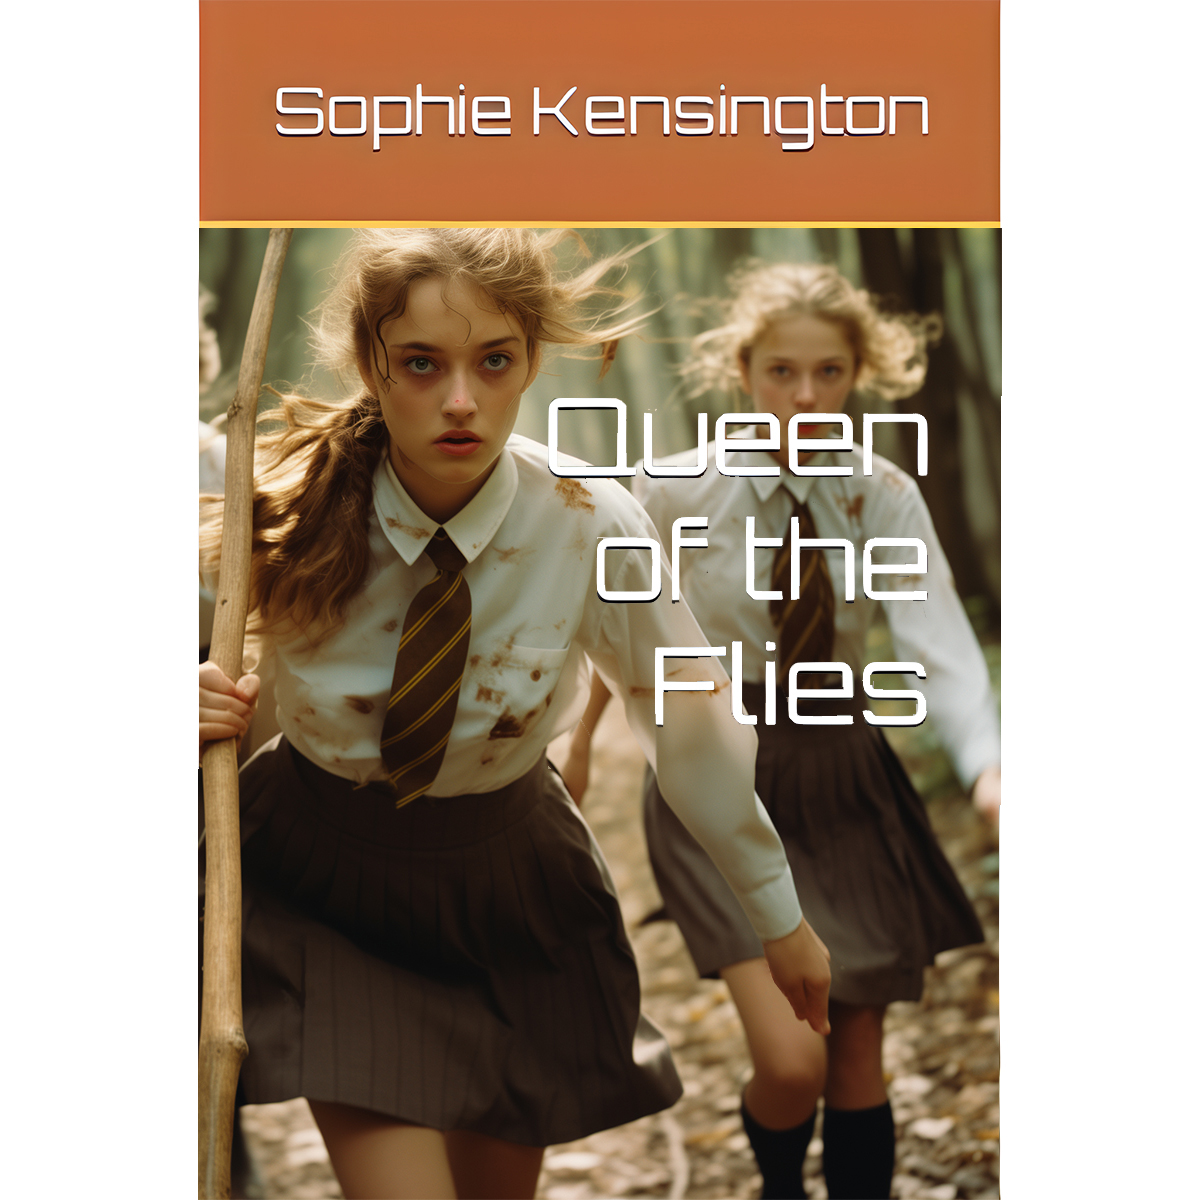 It's time for the Saturday #writerslift! Drop your #blog #books #art #vella #music links below so I can repost them!  

This is my favorite book 'Queen of the Flies': a.co/d/cBWqQoG You can read it FREE on Kindle Unlimited.                

And you can find my first